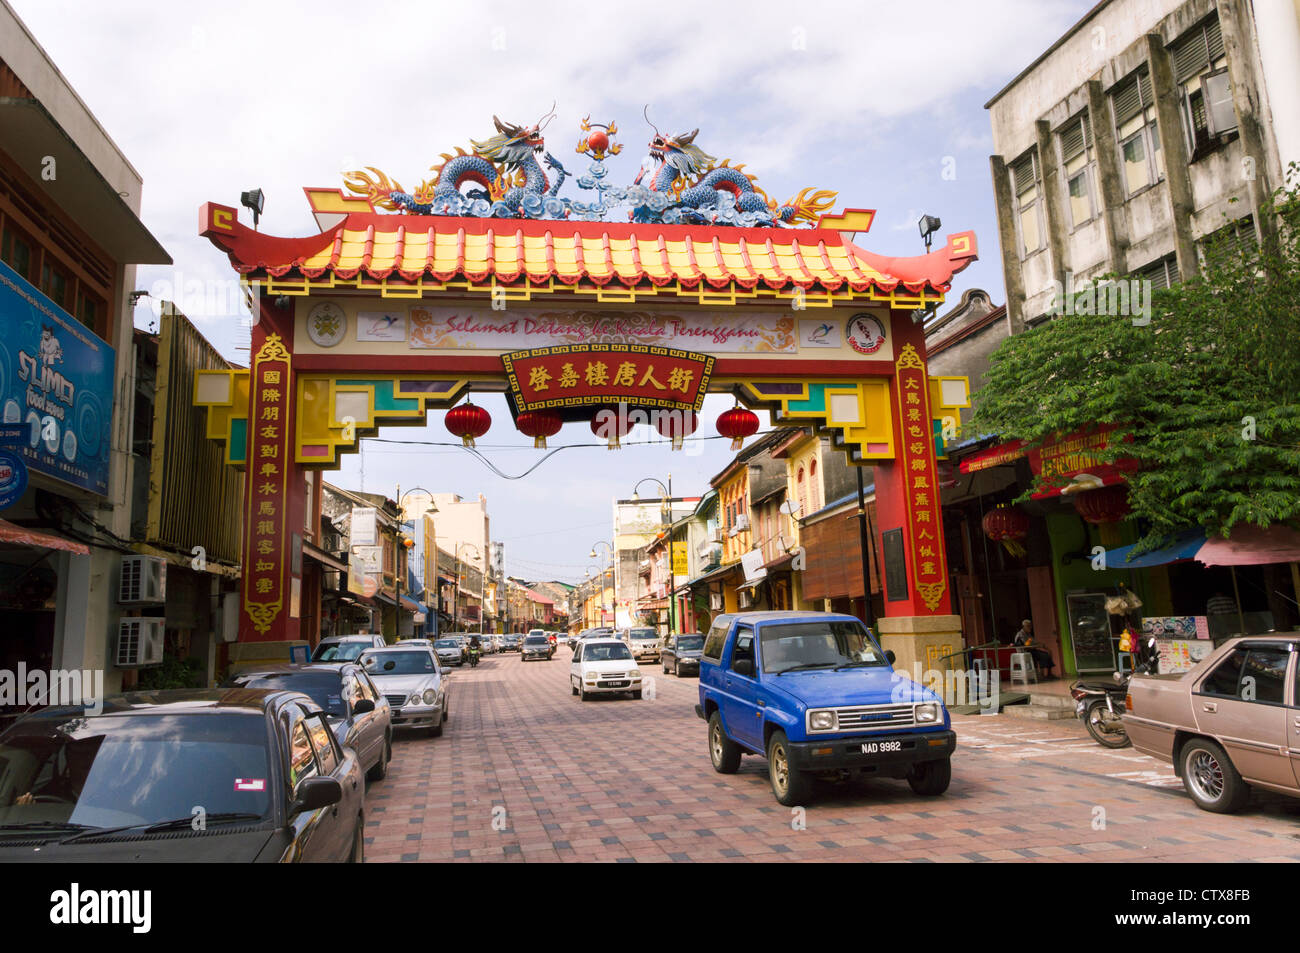 the entrance arch of terengganu chinatown, malaysia Stock Photo